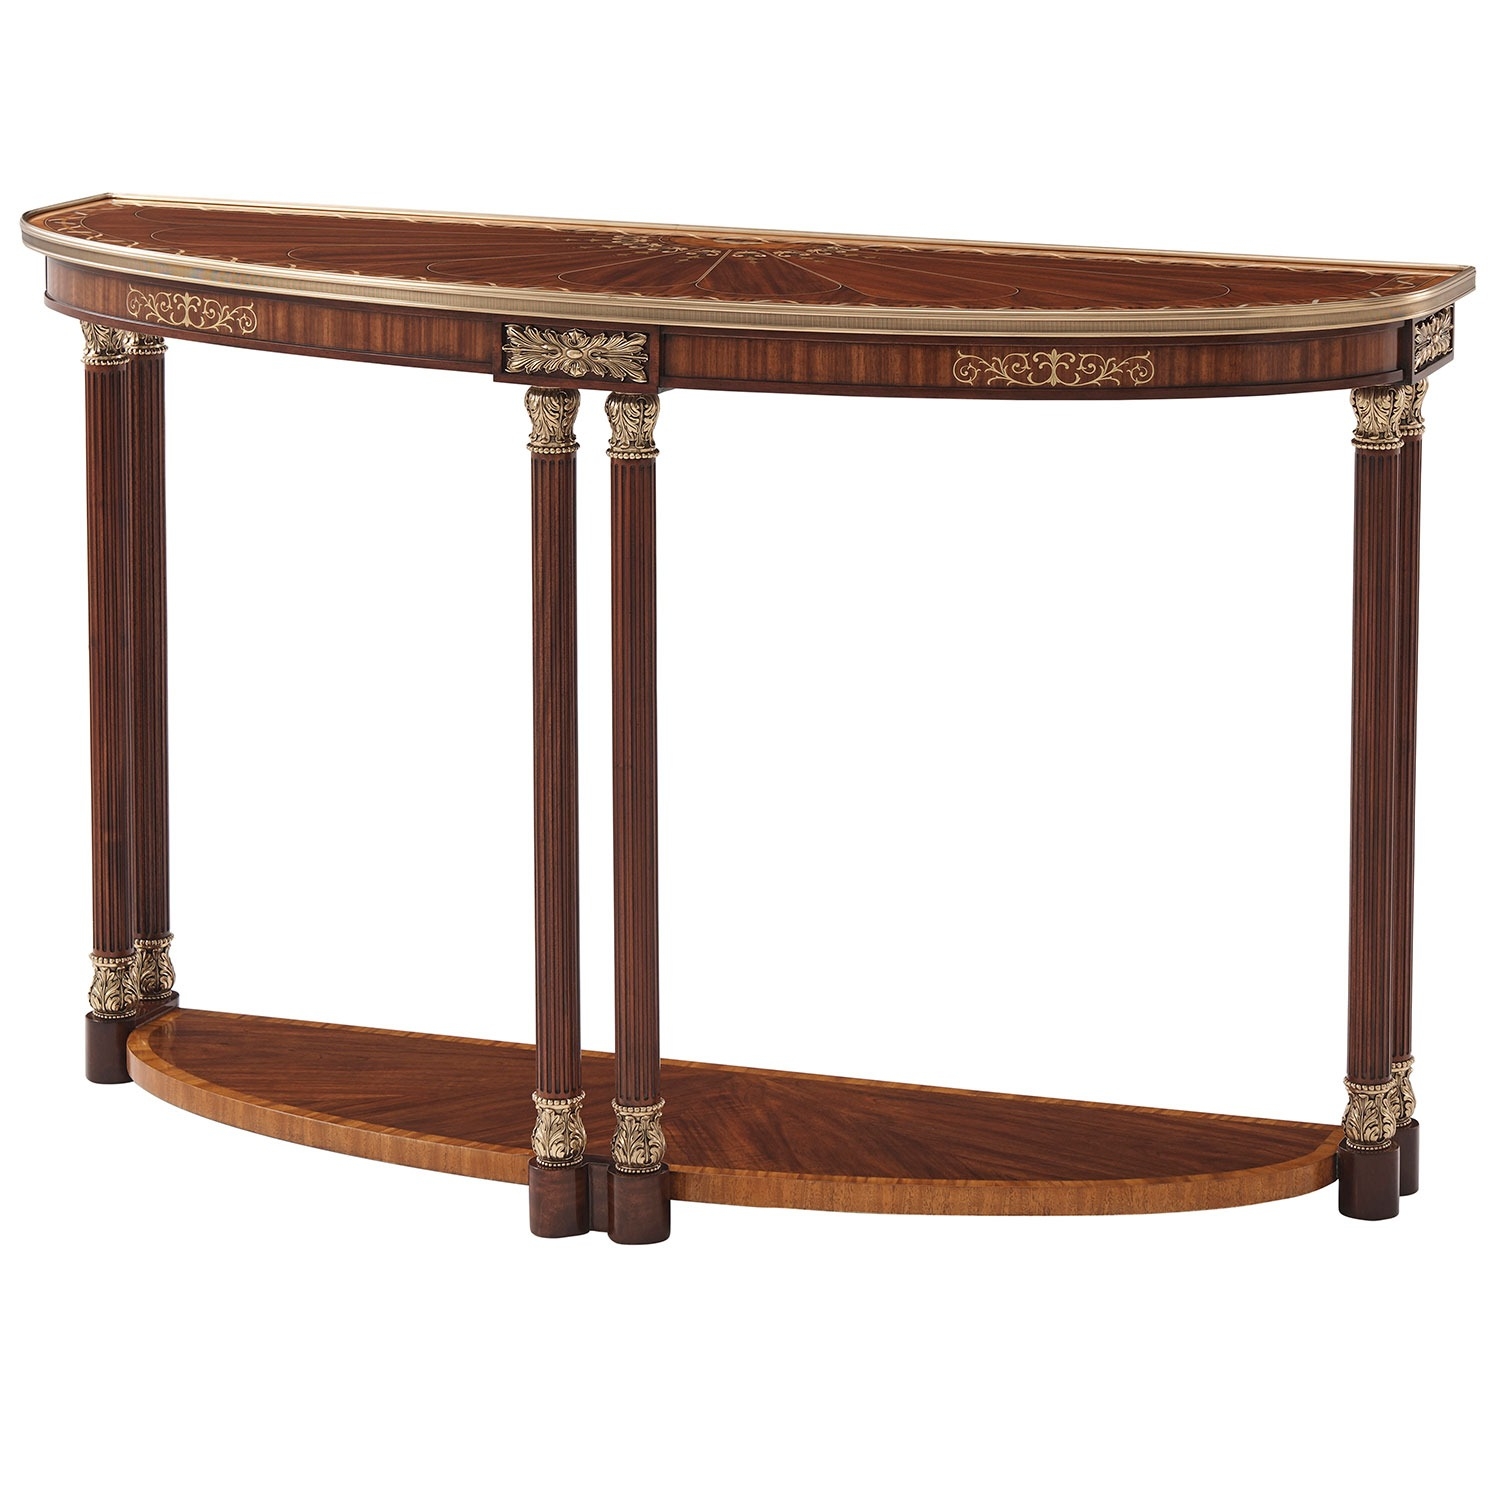 Theodore Alexander Demilune Mahogany  Console Table with Mother of Pearl Inlay